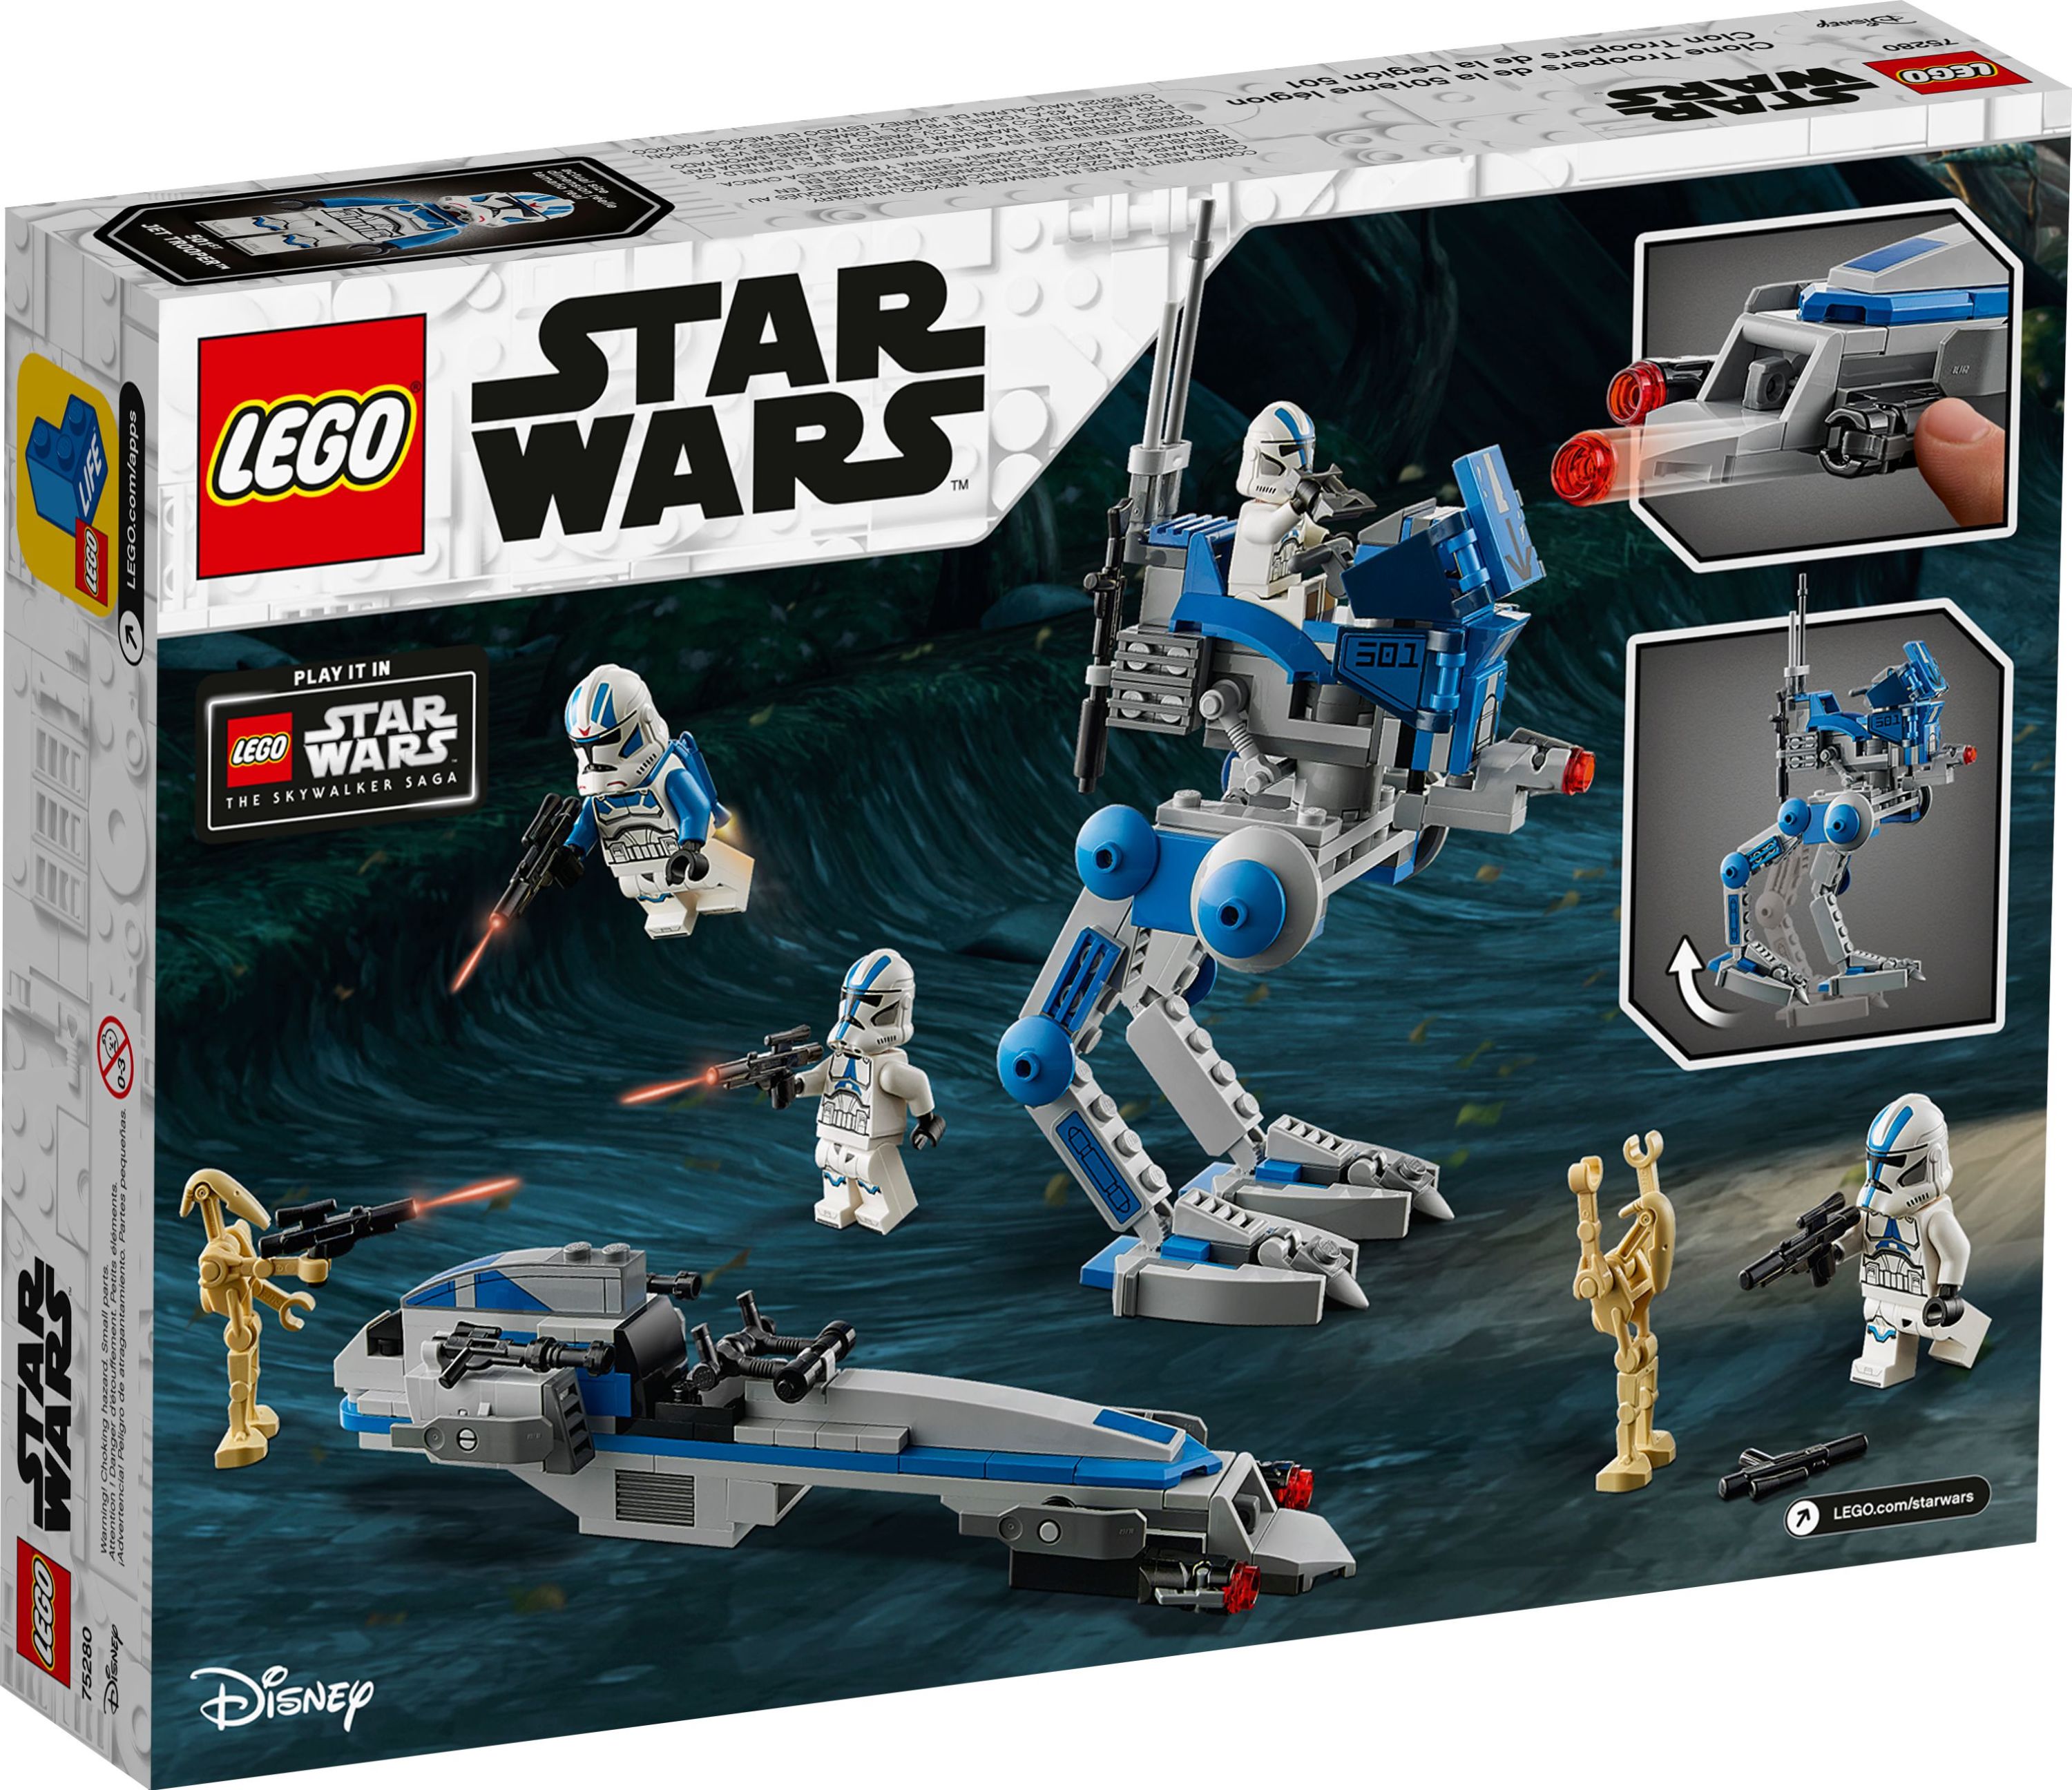 LEGO Star Wars 501st Legion Clone Troopers 75280 Building Toy, Cool Action Set for Creative Play (285 Pieces) - image 5 of 7